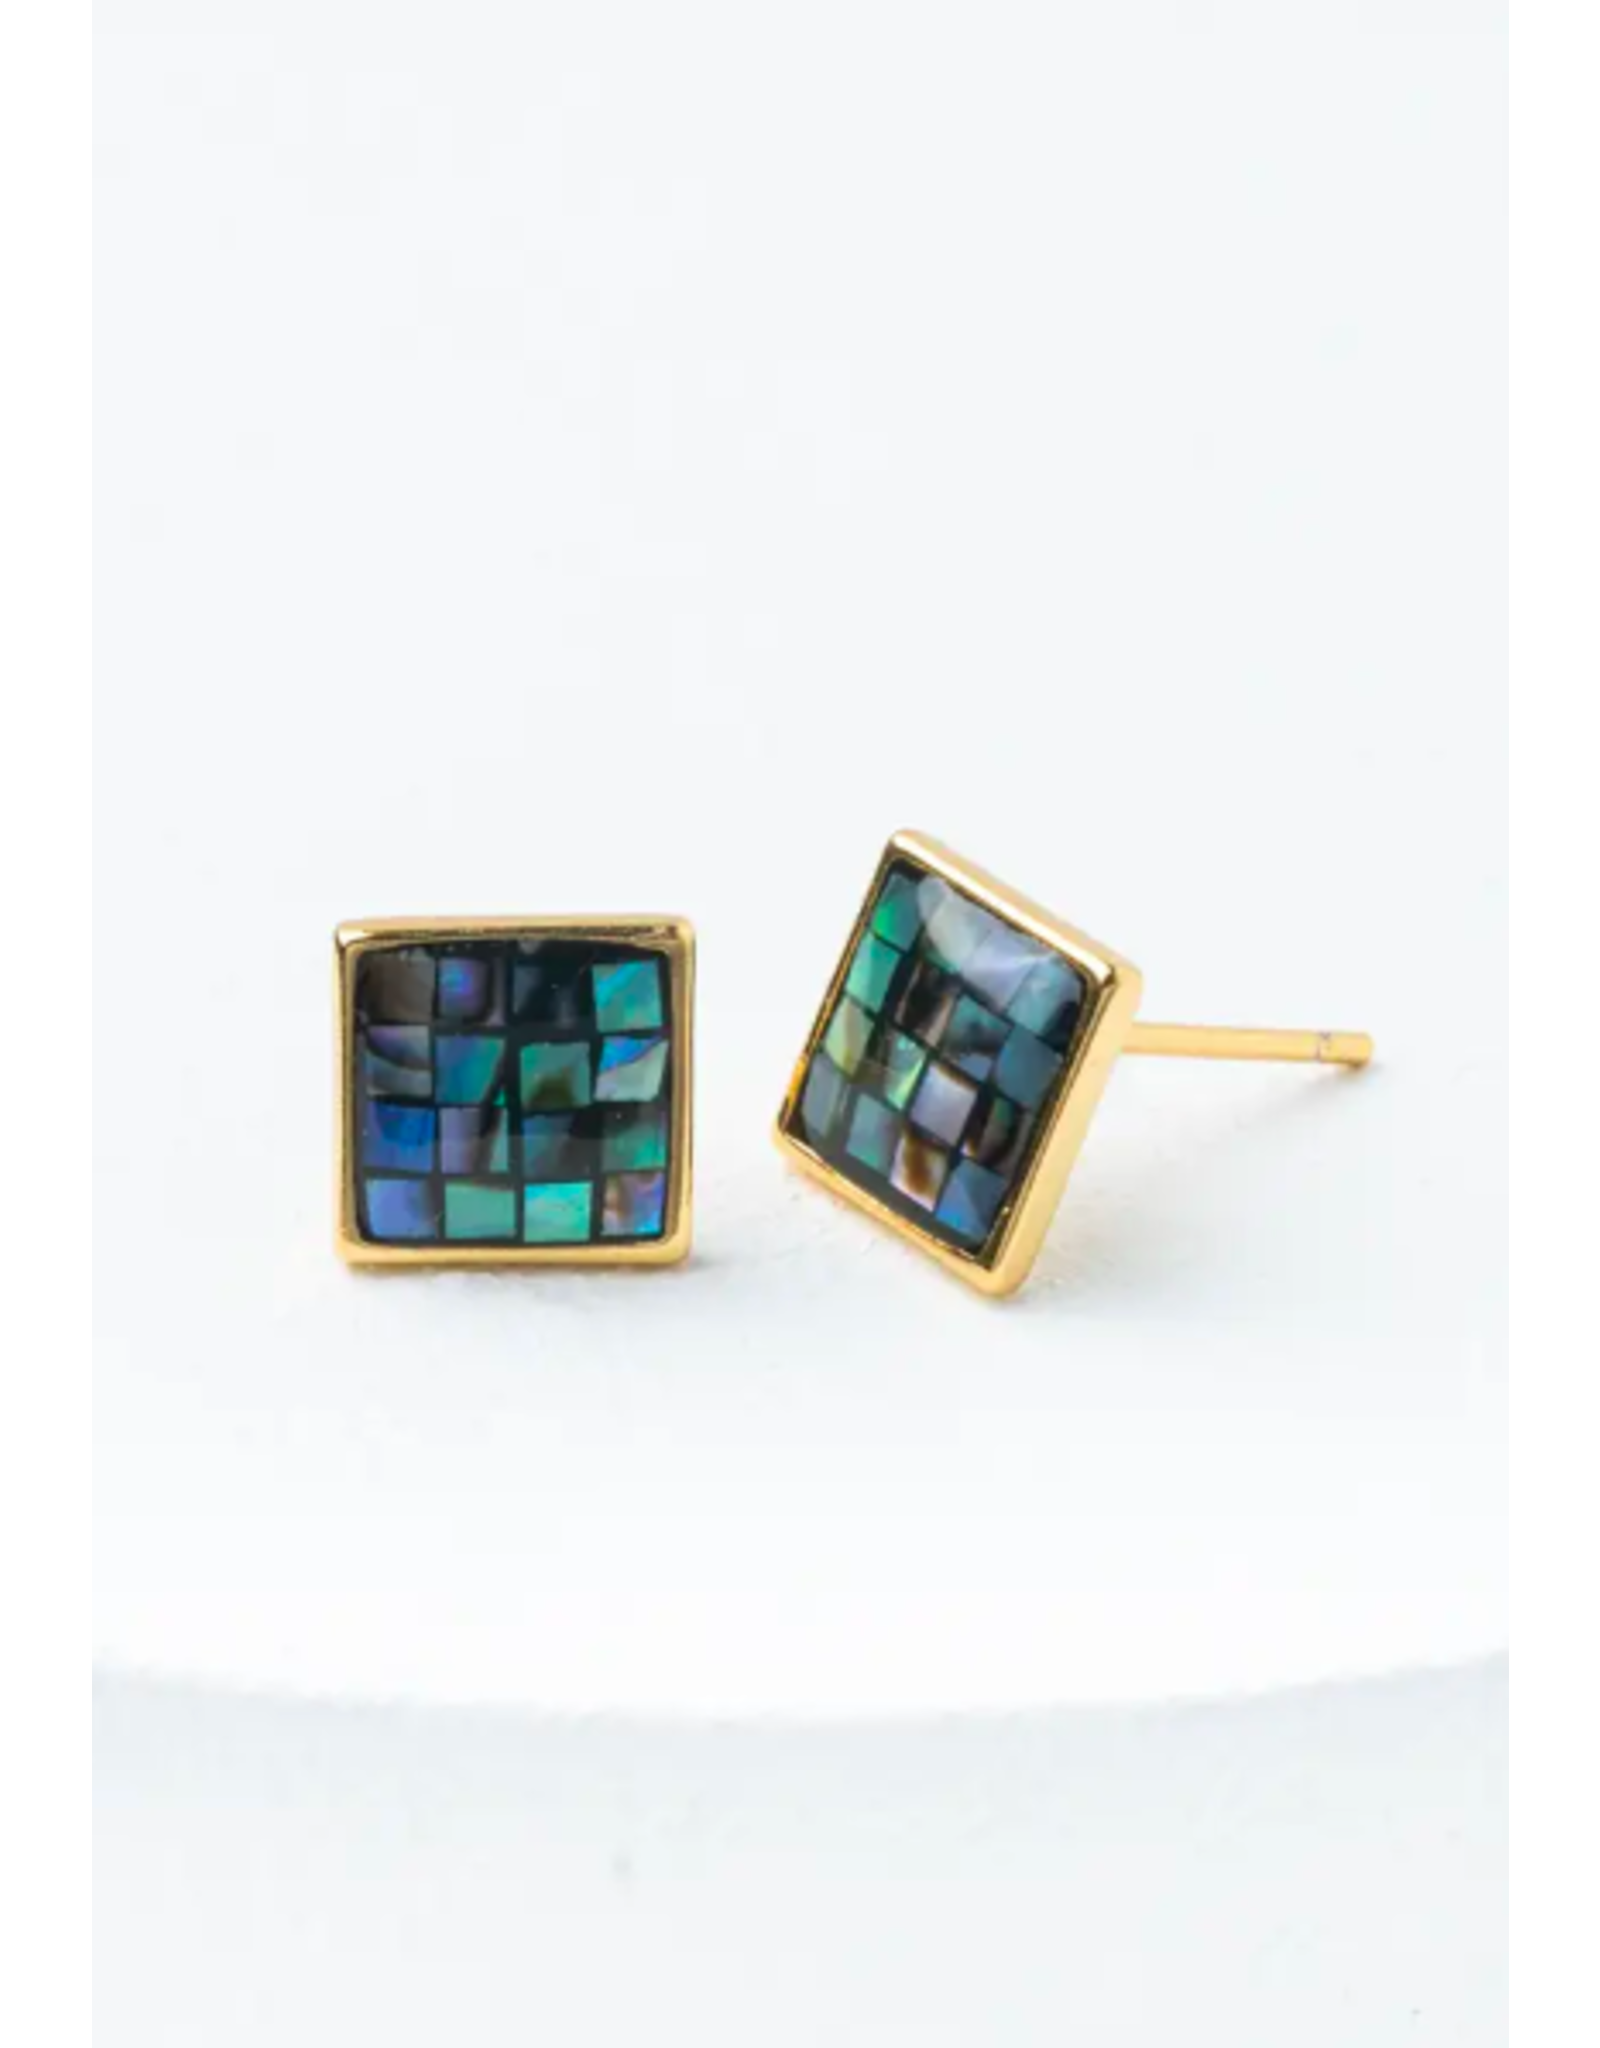 Delighted-in Earrings in Abalone